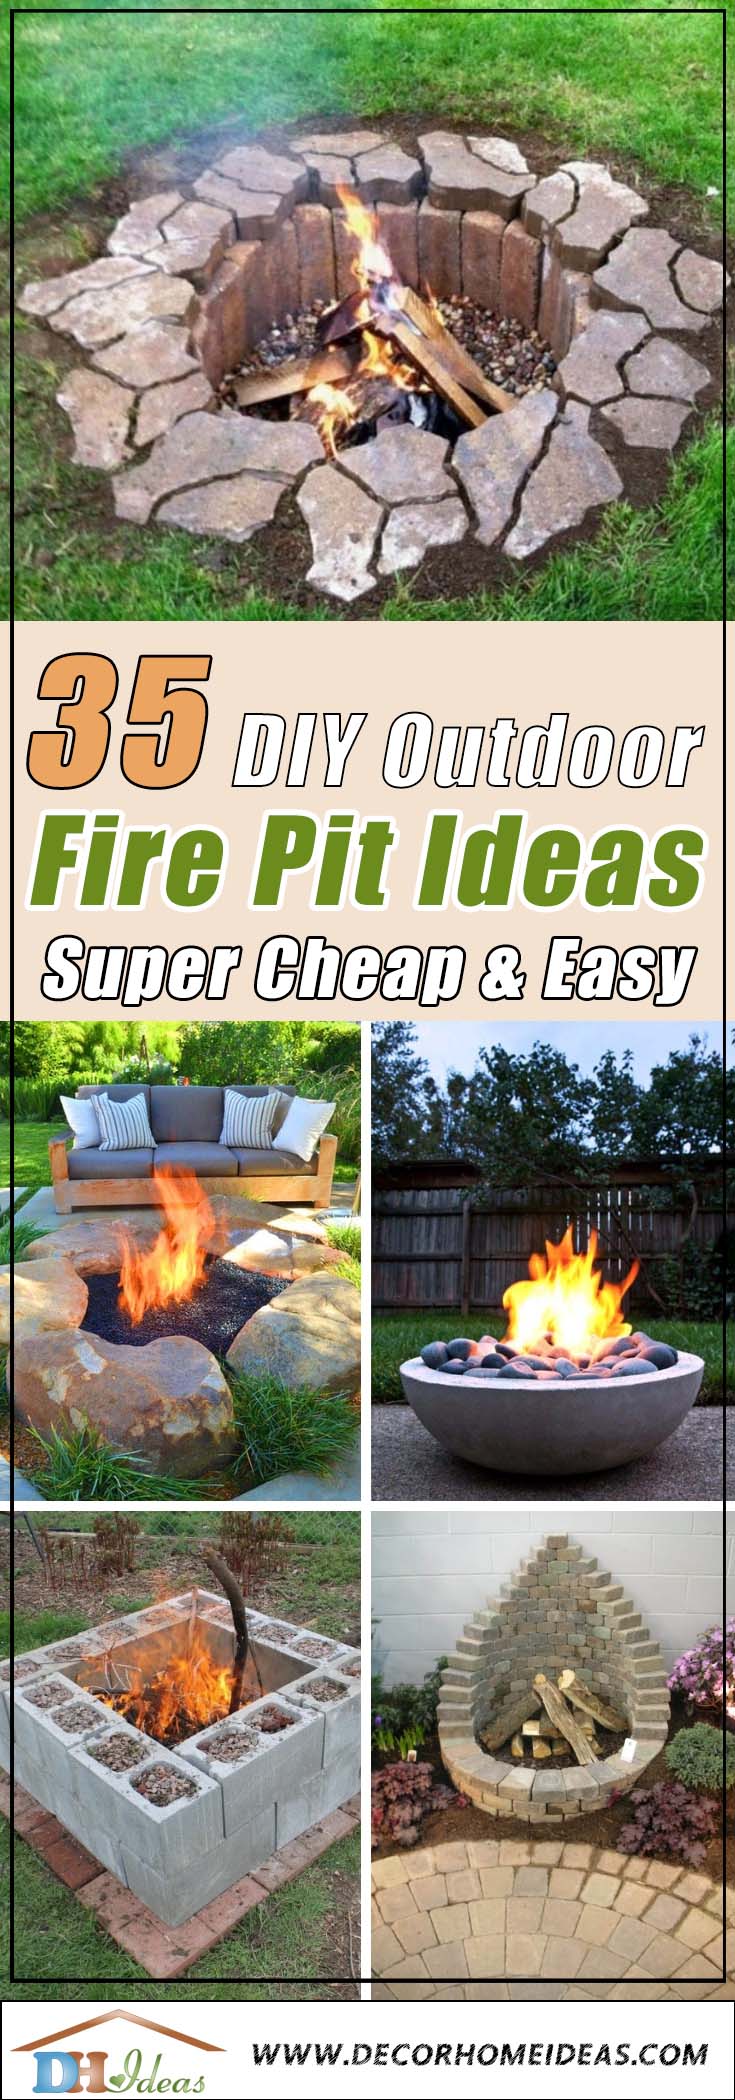 35 Easy To Do Fire Pit Ideas And, How To Build Your Own Outdoor Fire Pit